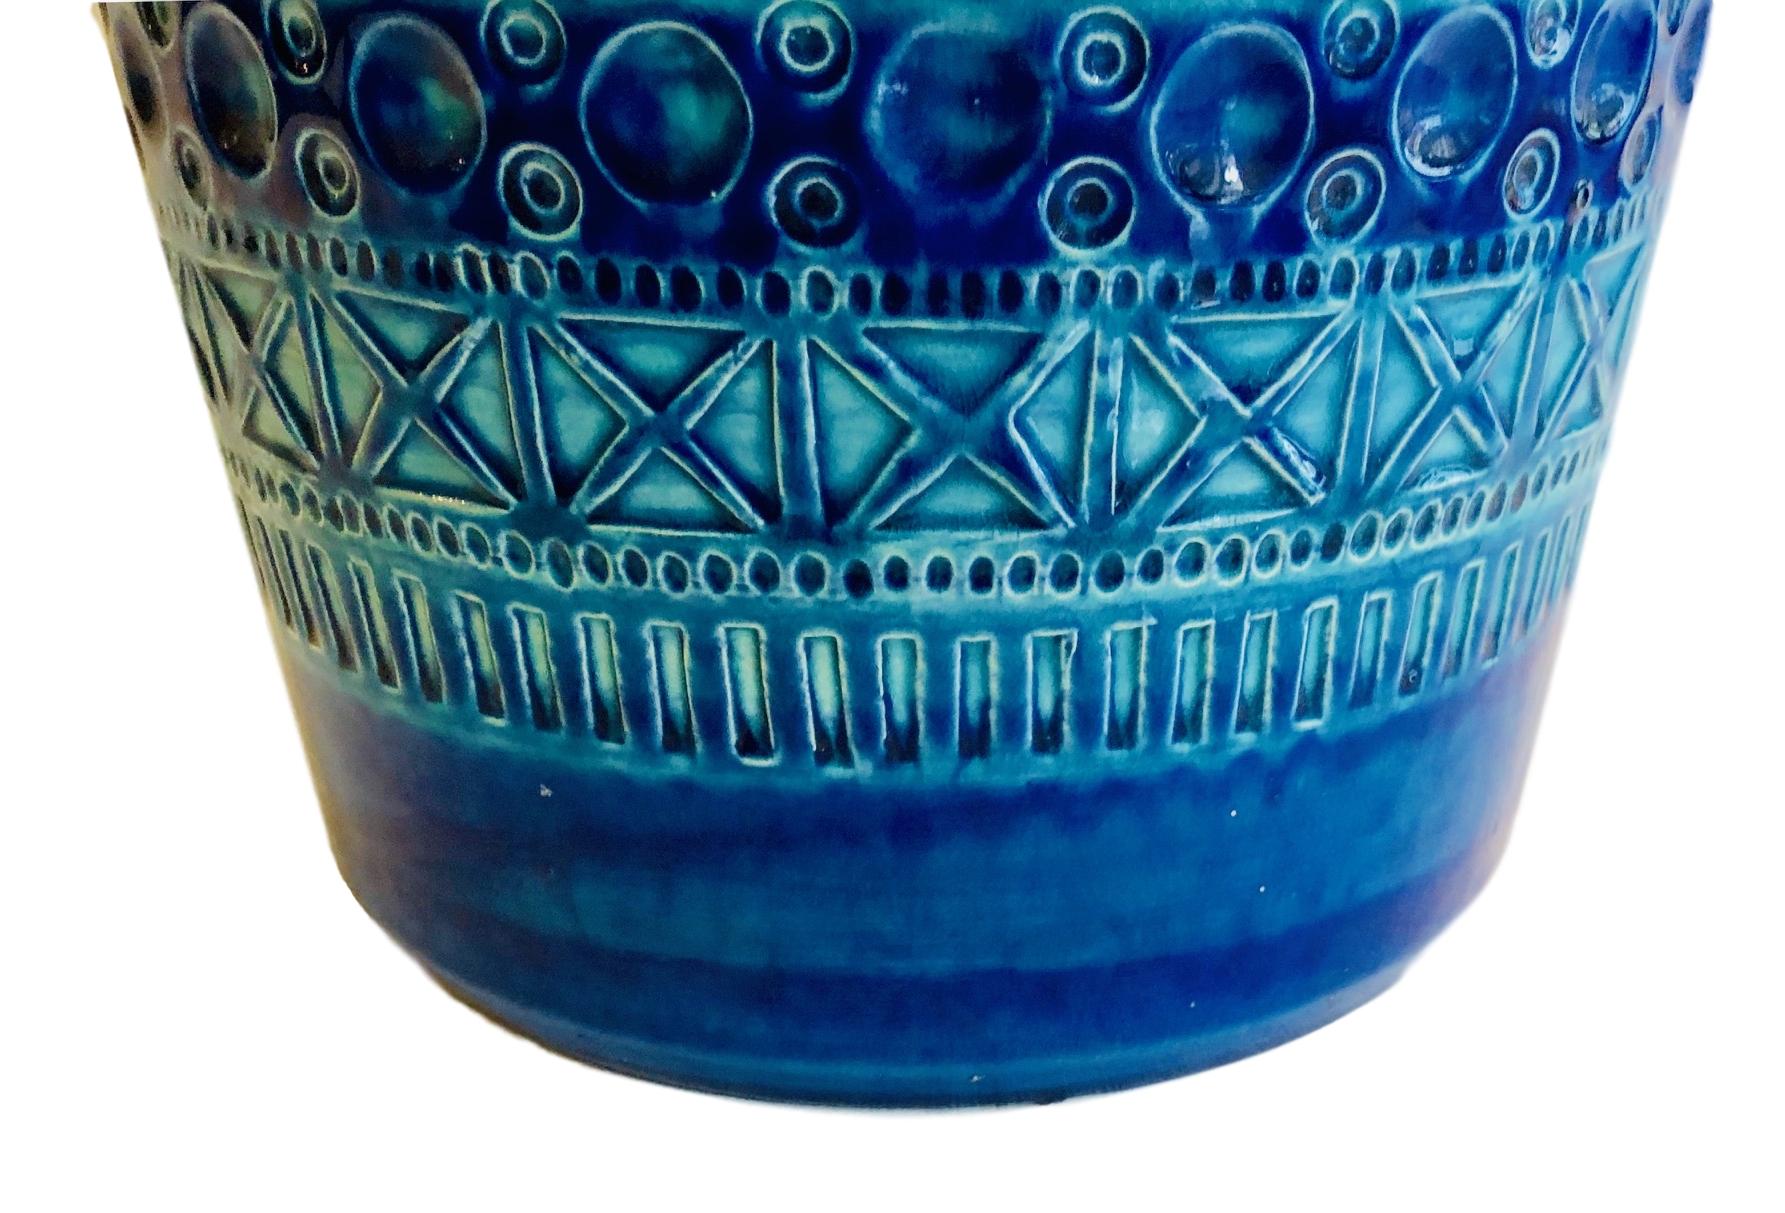 A large circa 1960s German glazed cermaic vase with textured surface in two tones of blue.

Measurements:
Height: 20.5